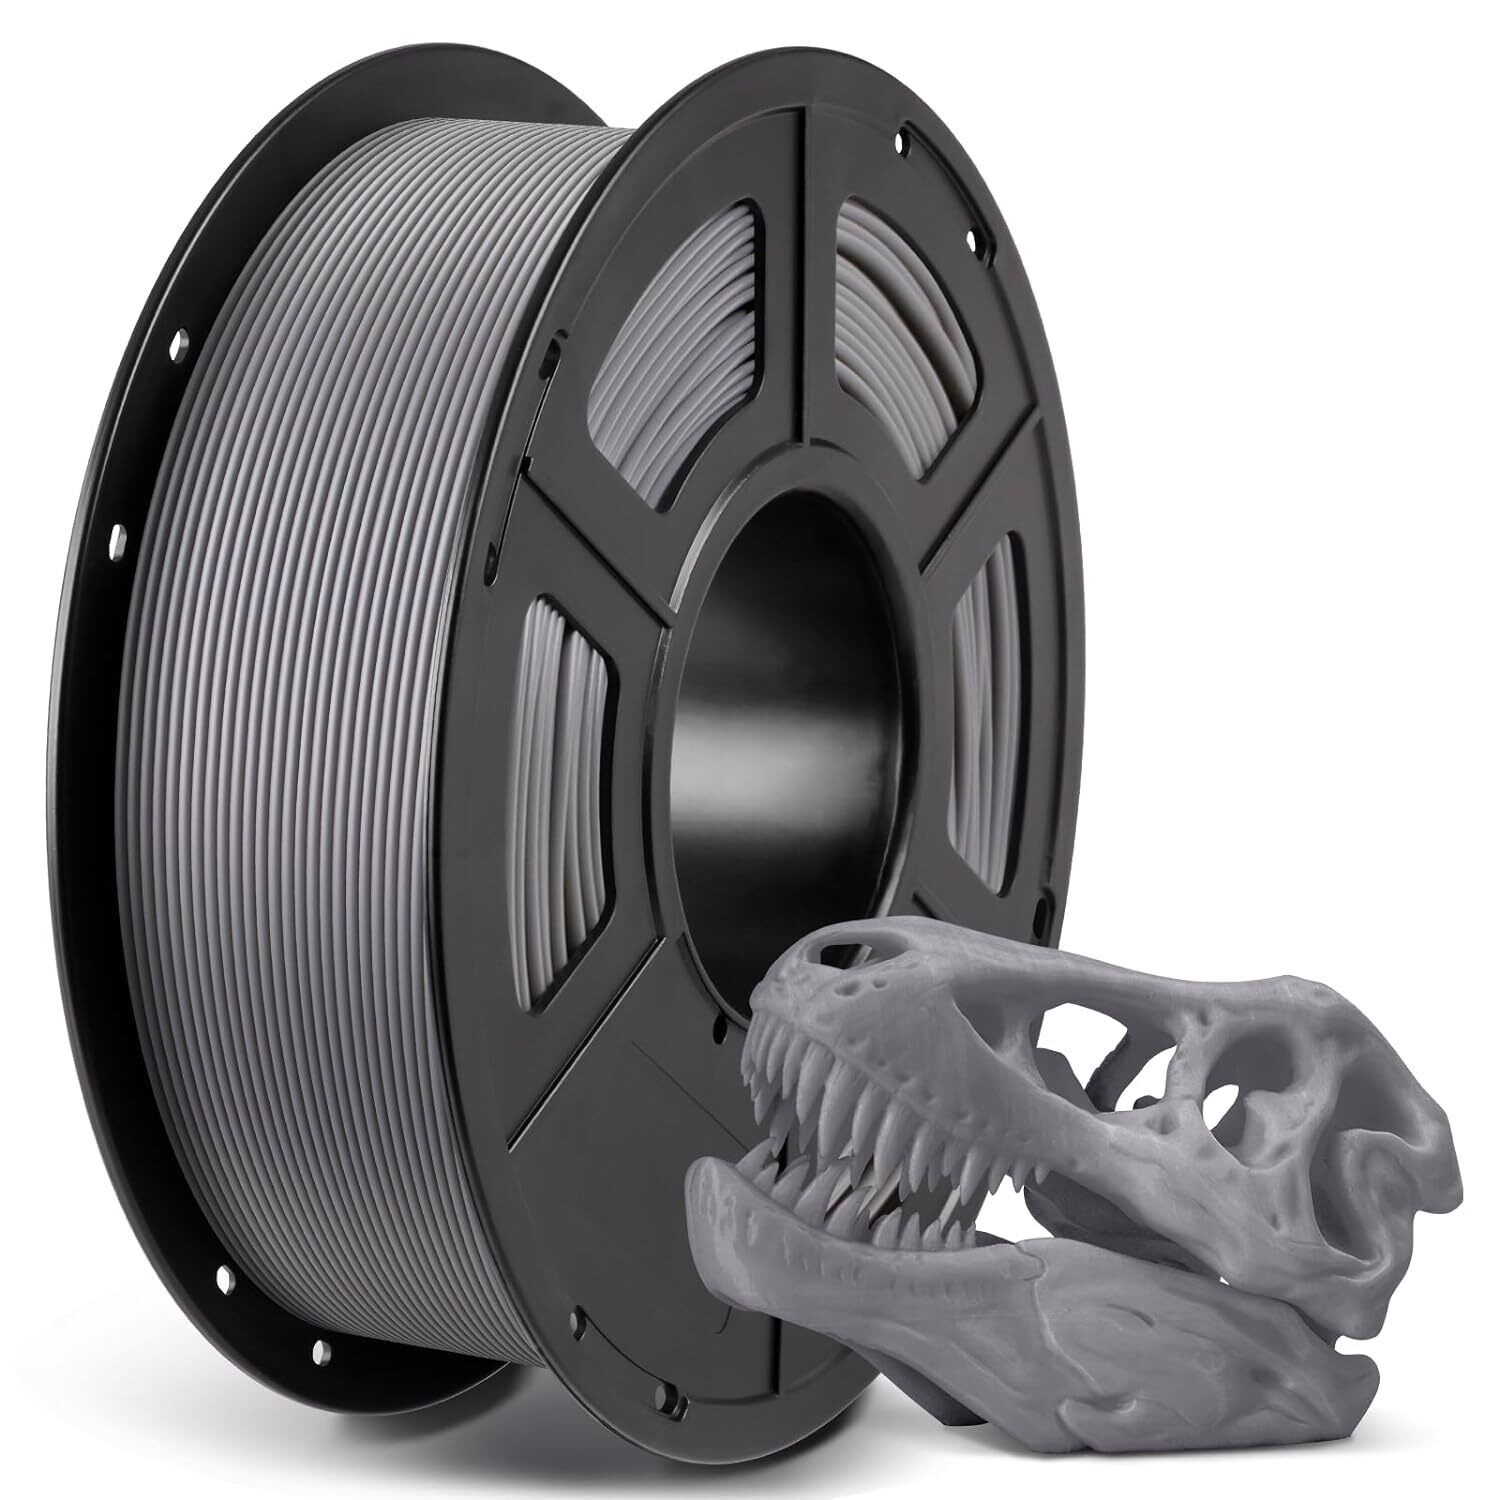 [BUY 10 PAY 6] ANYCUBIC 1KG PLA+/ PETG/ Silk/ Matte/ High Speed PLA 3D Filament